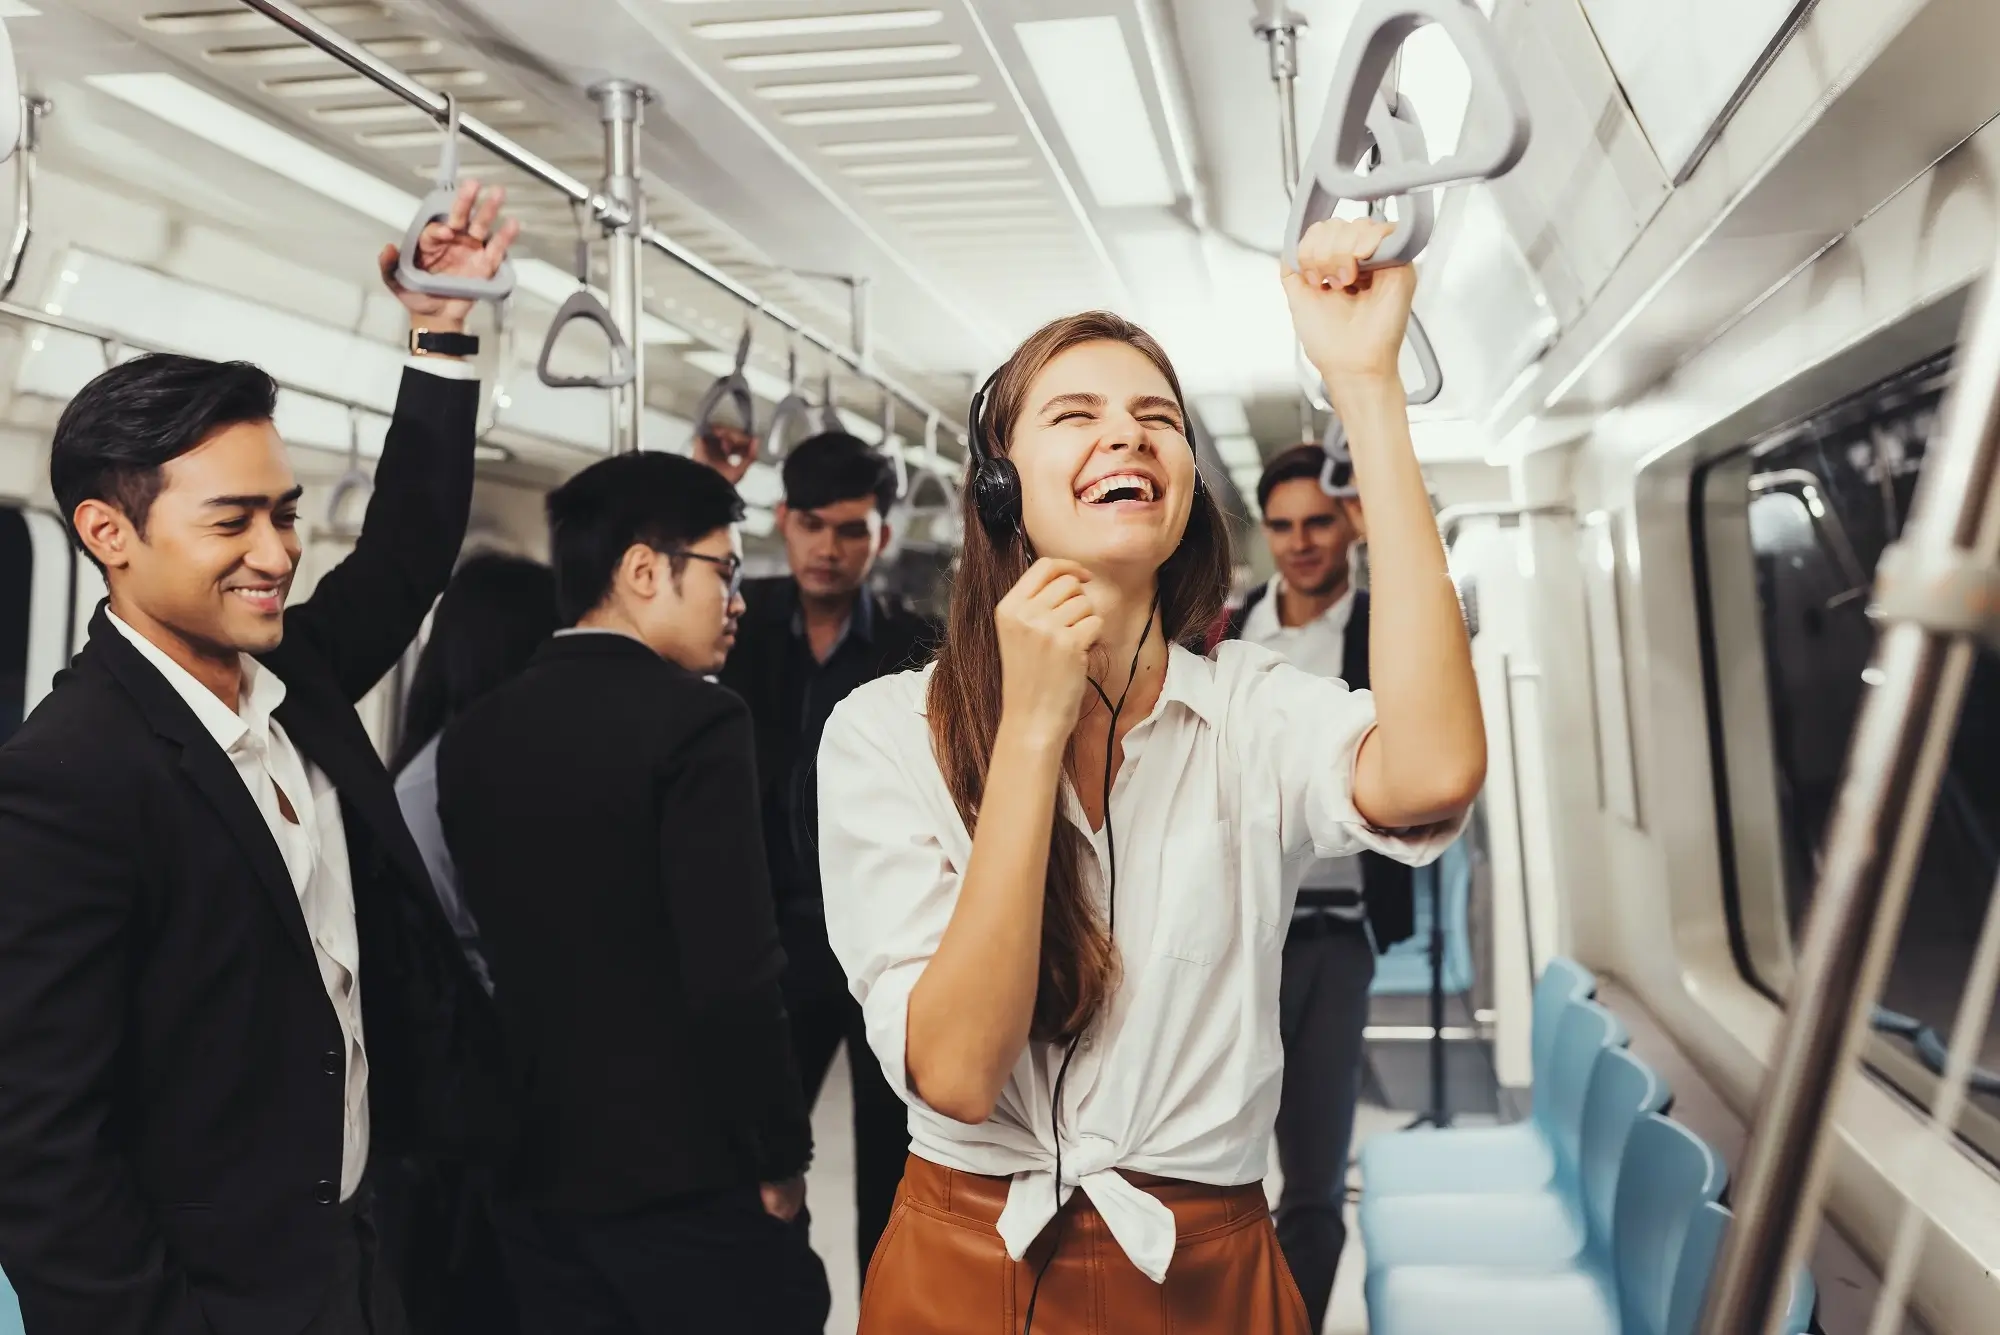 A man and a woman sharing a laugh inside a train.